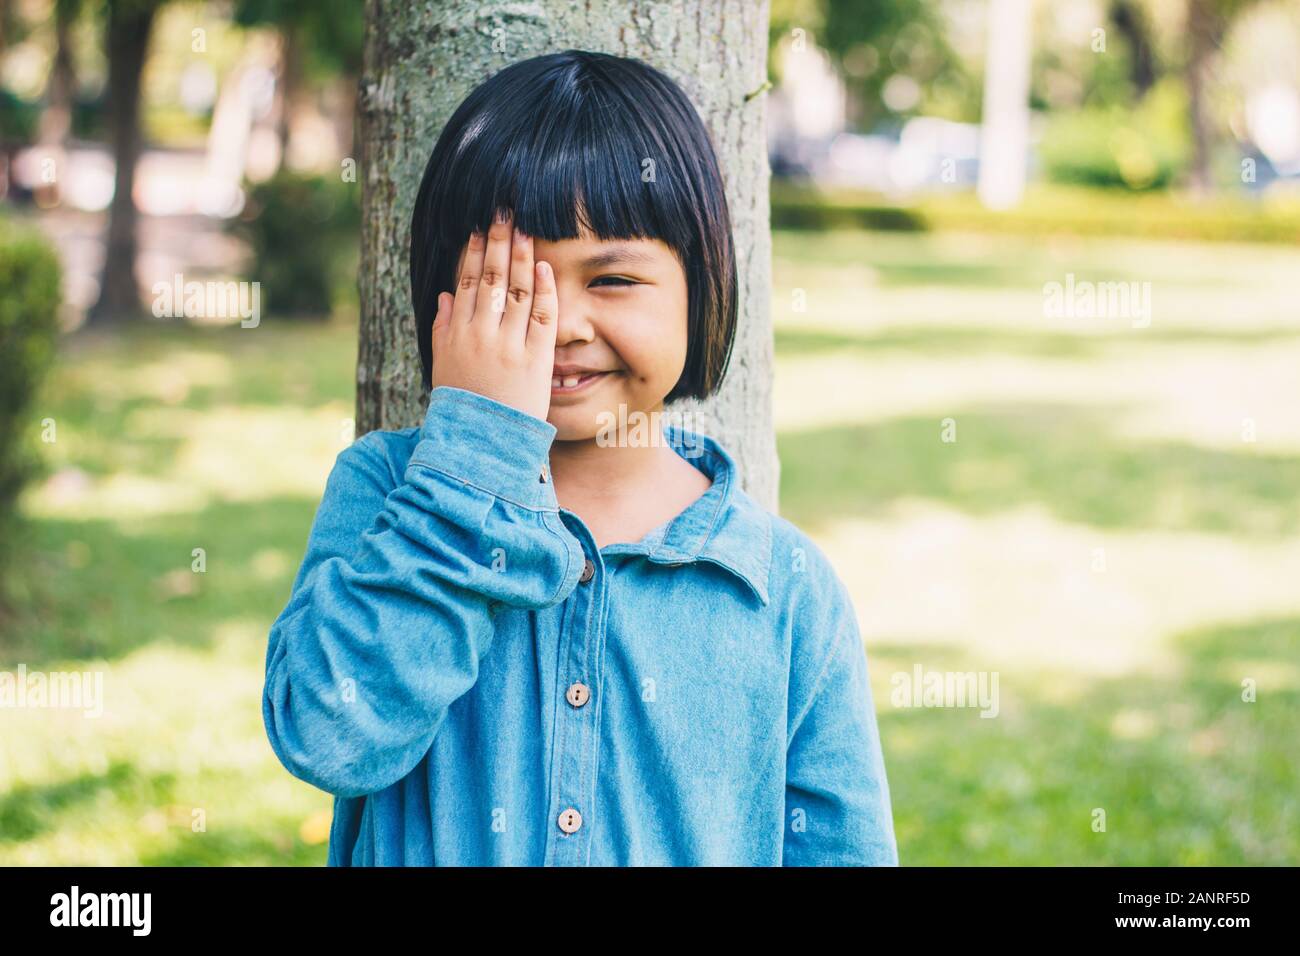 The image of a little girl with her hands closed, her right eye leaning against a tree in a park. Stock Photo